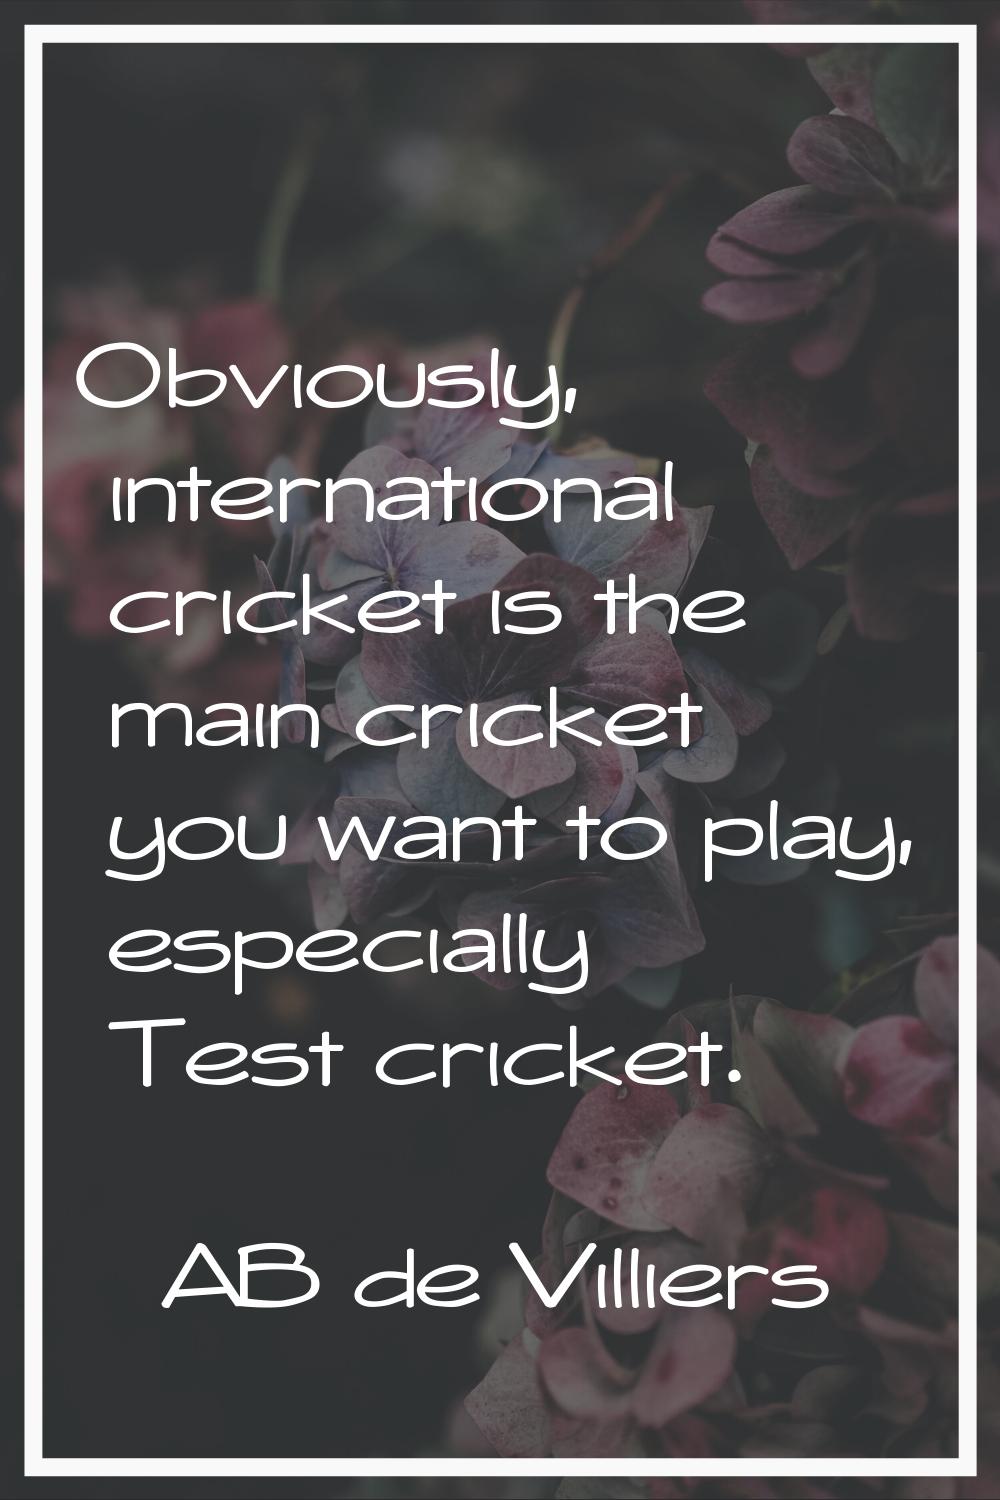 Obviously, international cricket is the main cricket you want to play, especially Test cricket.